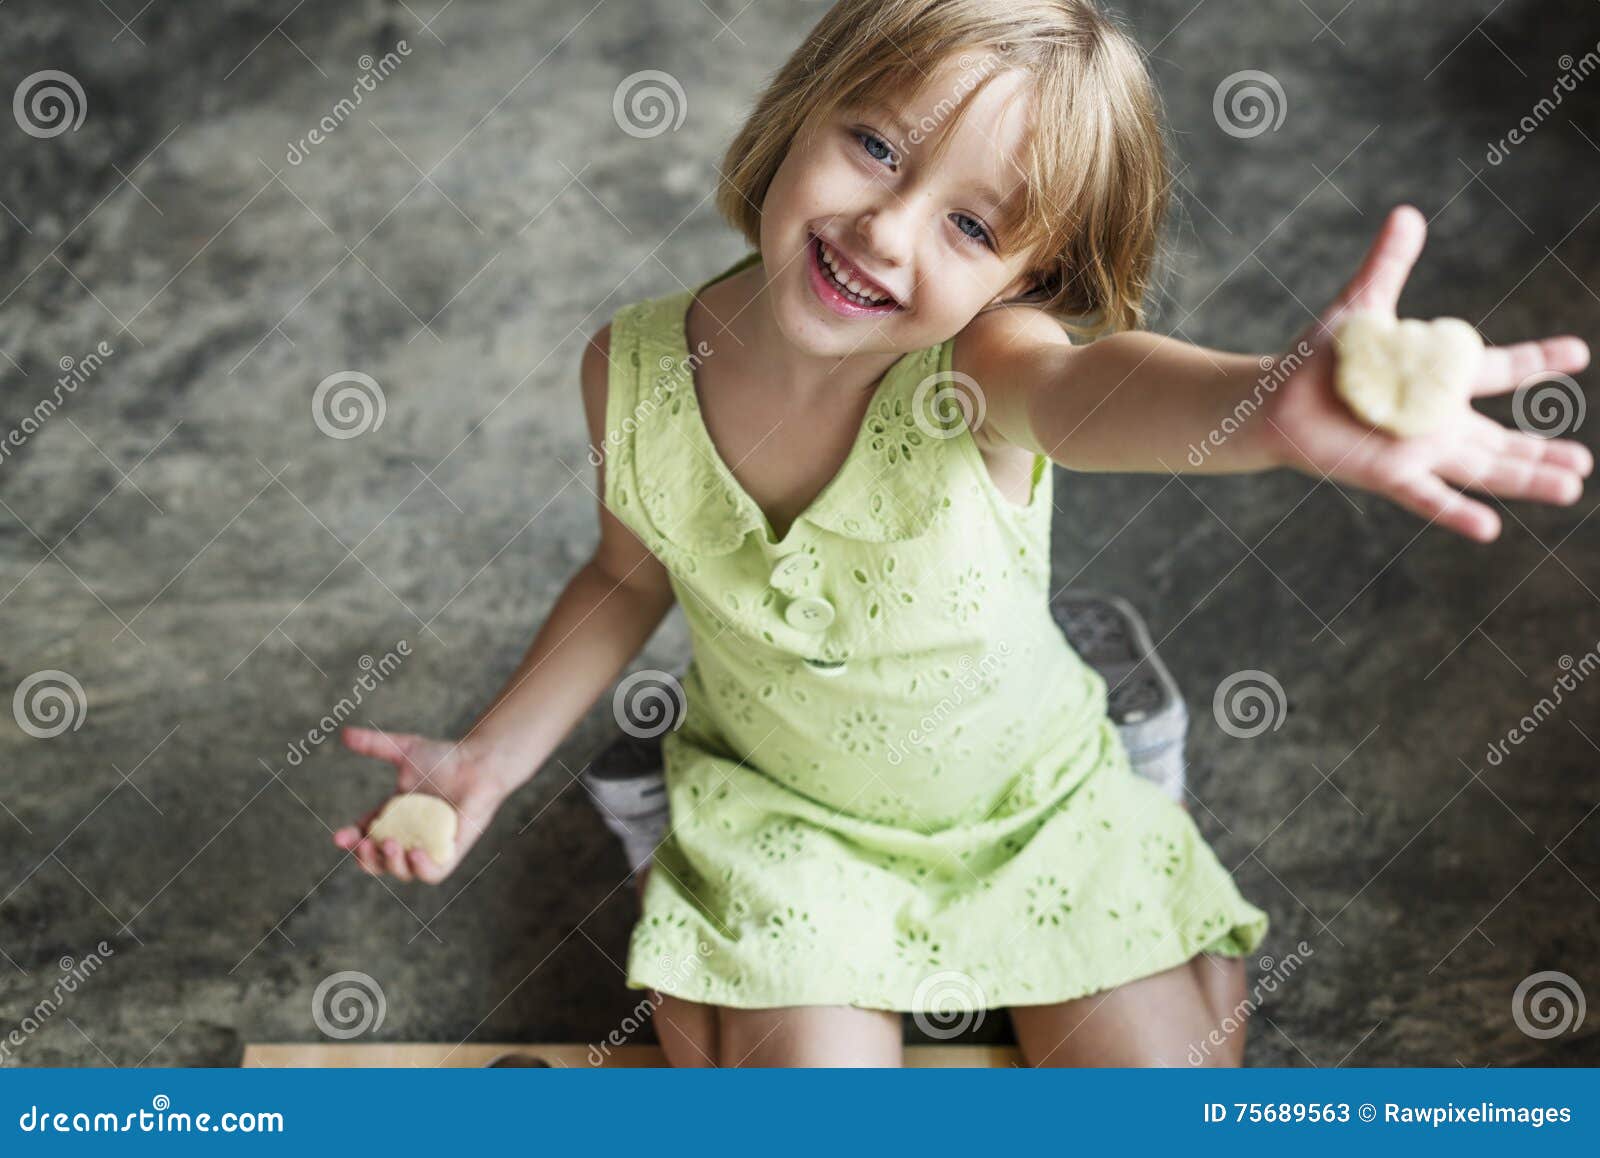 little girl happiness adolescence cute concept